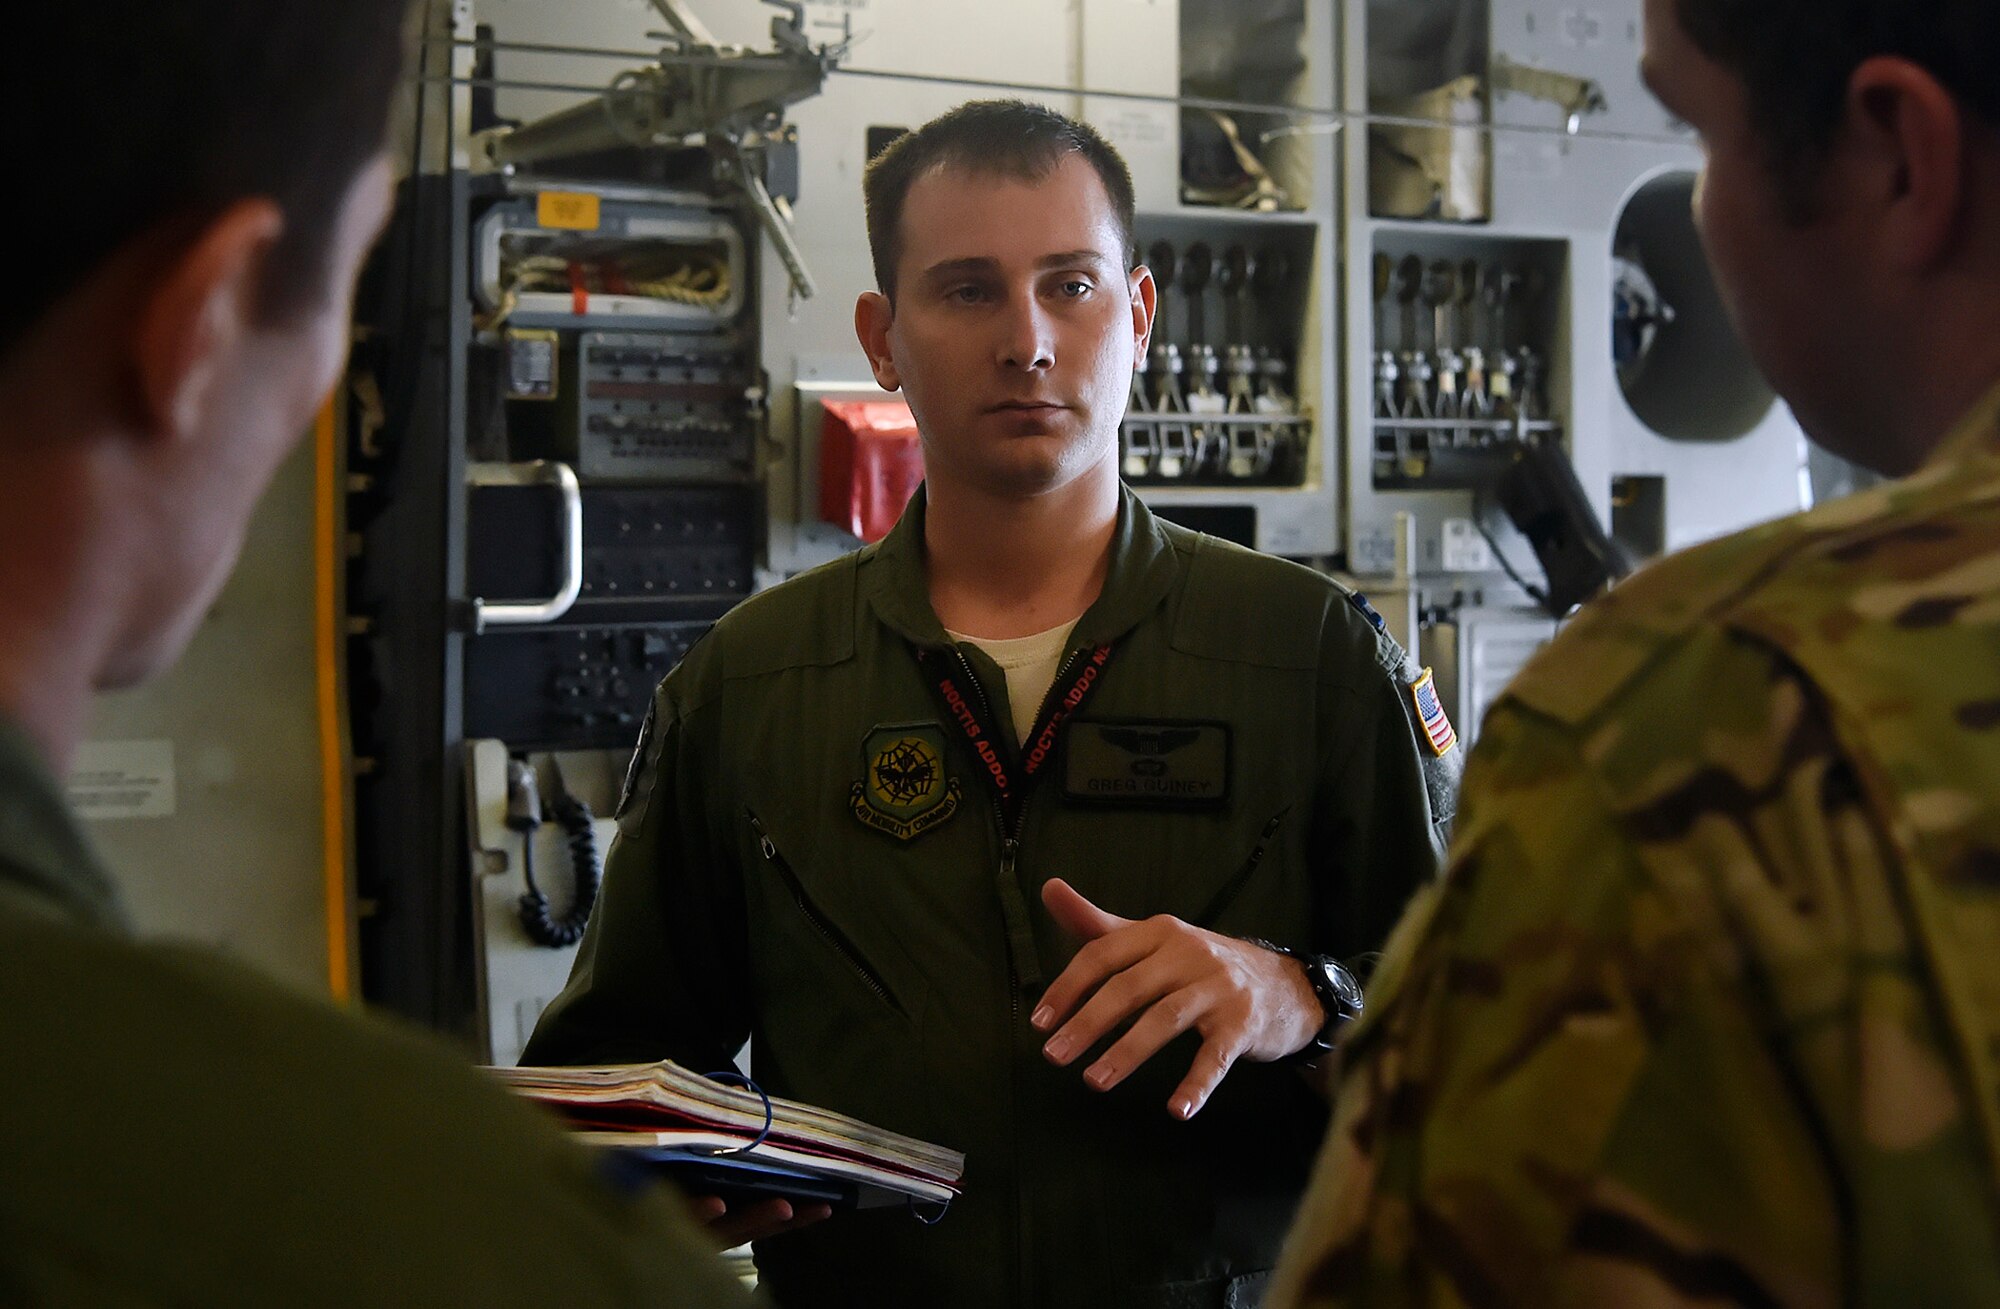 Capt. Brian Guiney, 16th Airlift Squadron C-17 Globemaster III pilot, briefs aircrew members here, prior to departing for Joint Base Lewis-McChord, Washington State, in support of Exercise Mobility Guardian July 31. Mobility Guardian is designed to enhance the capabilities of mobility Airmen to succeed in dynamic threat environments. The exercise features more than 3,000 participants and involves 25 countries from July 31 to Aug. 11. (U.S. Air Force photo by Staff Sgt. Christopher Hubenthal)